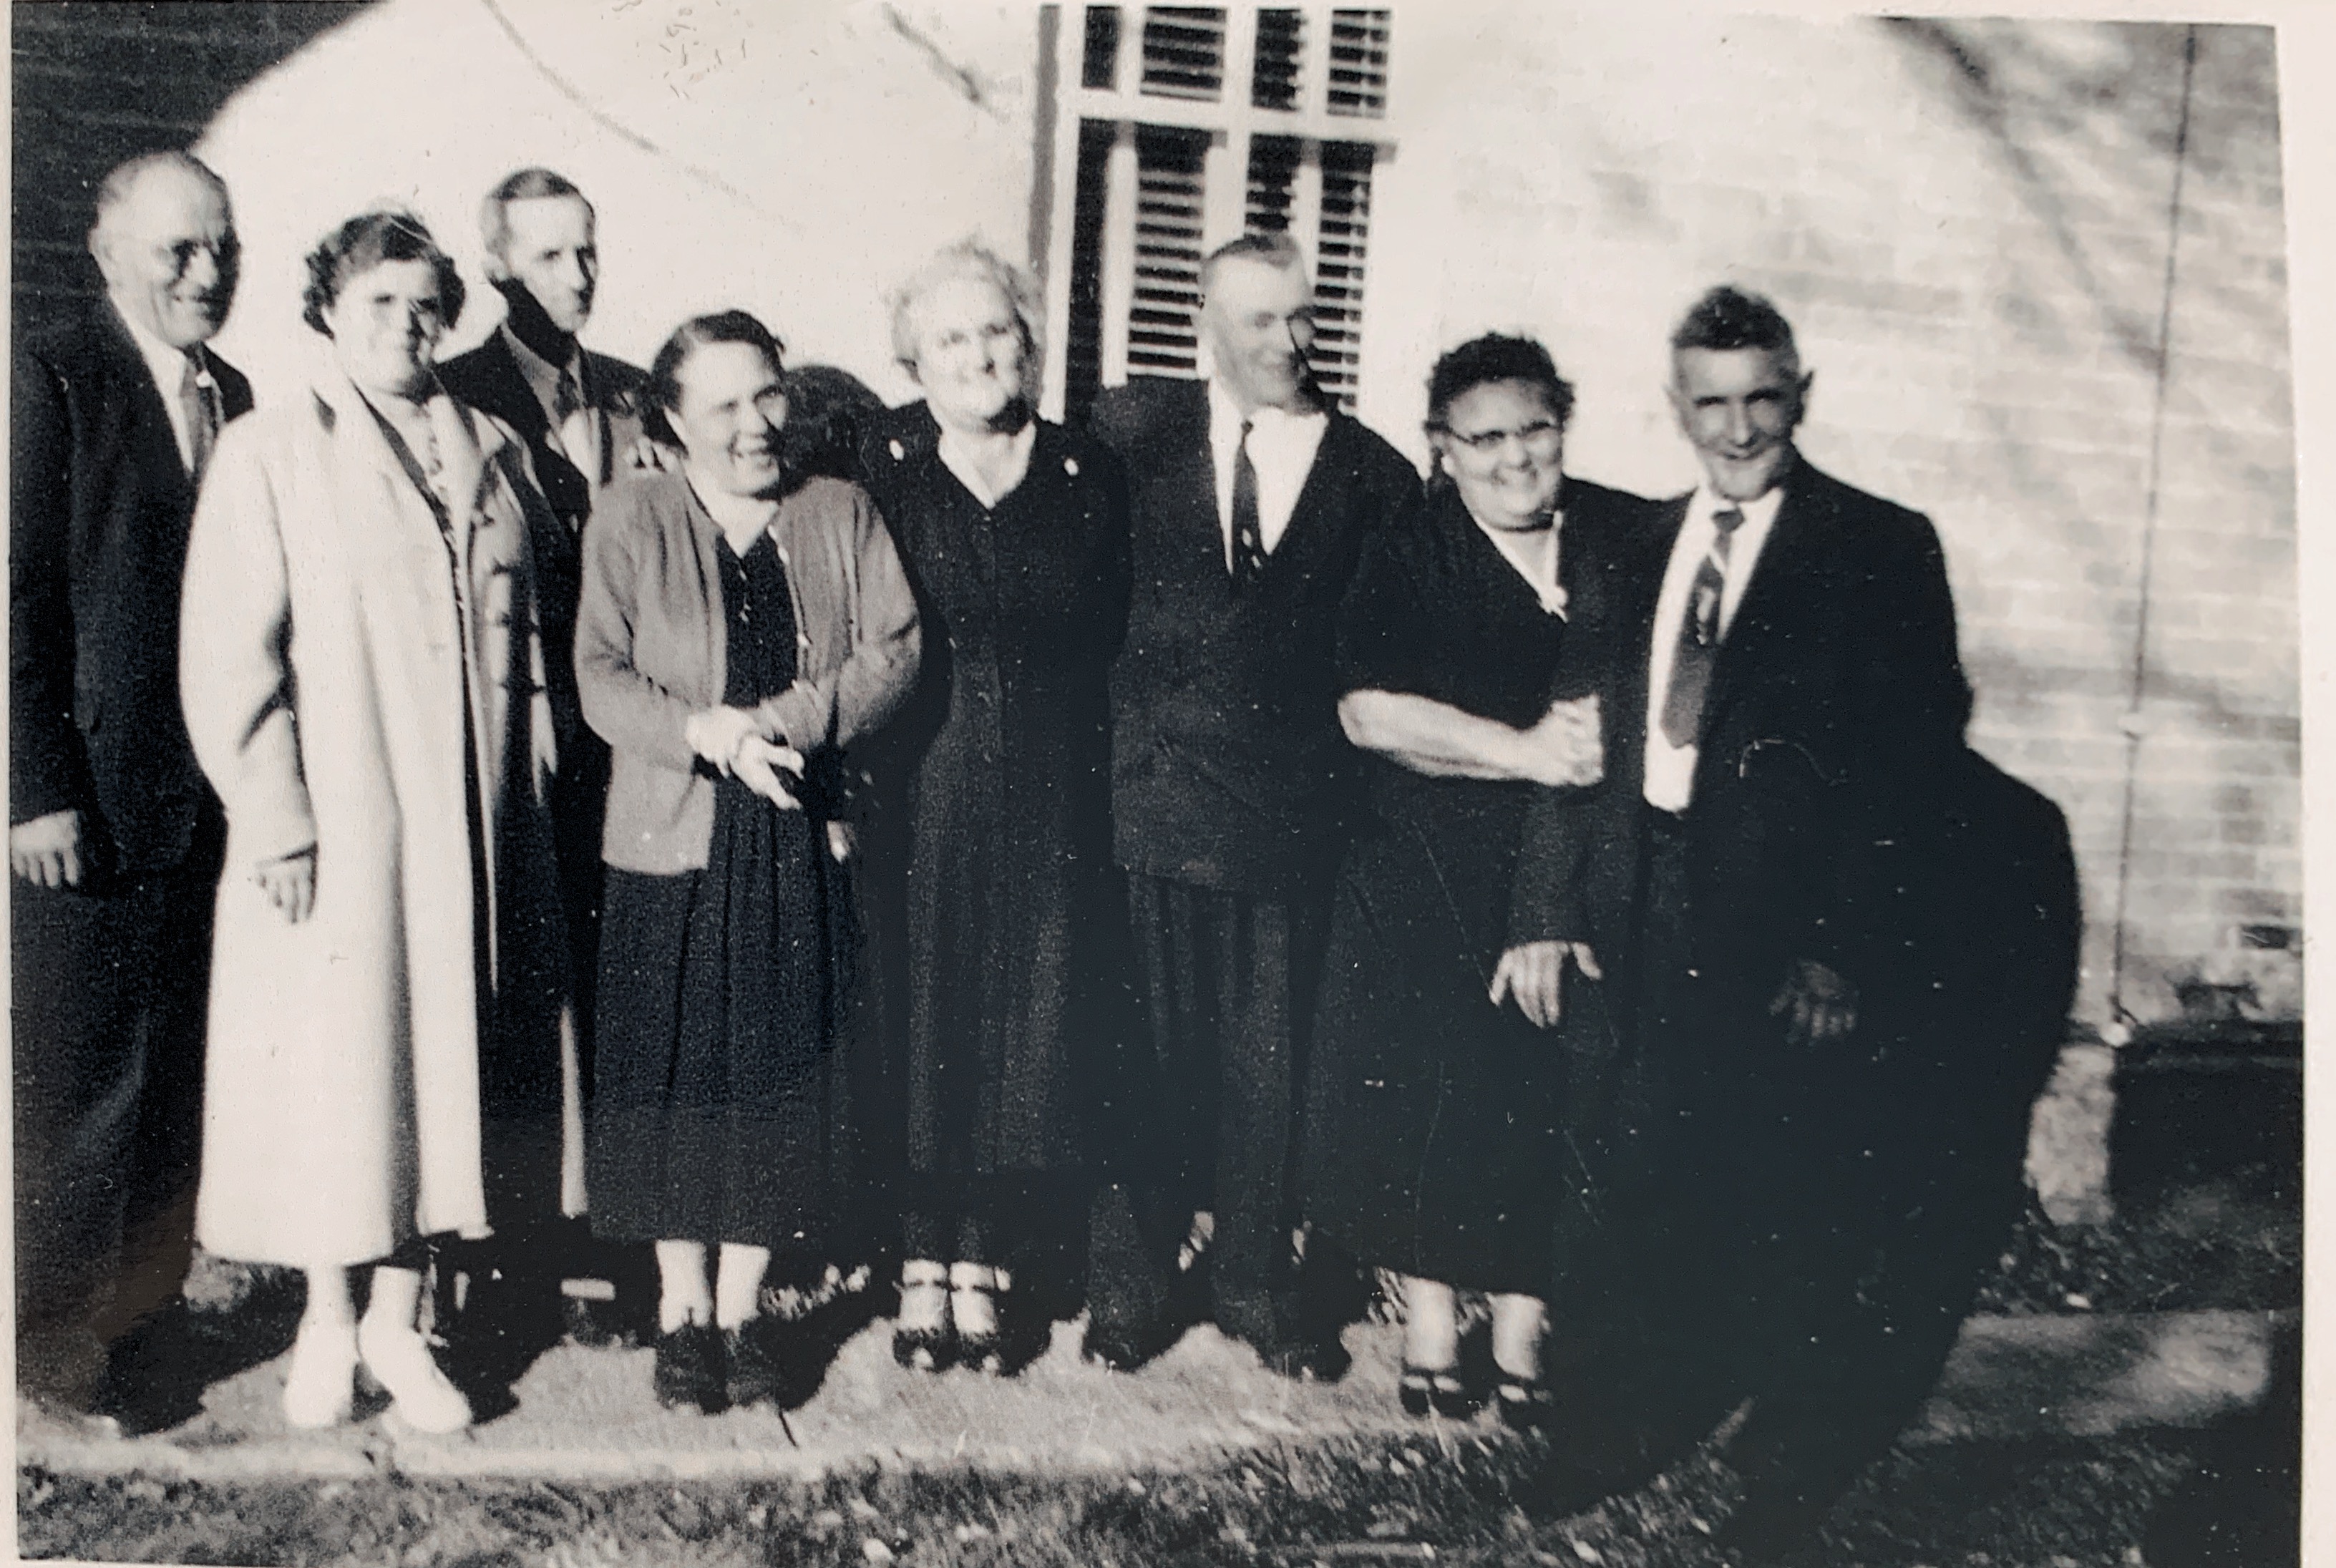 Pepere’s Father Funeral 1946 with his sister’s and brothers-in-law